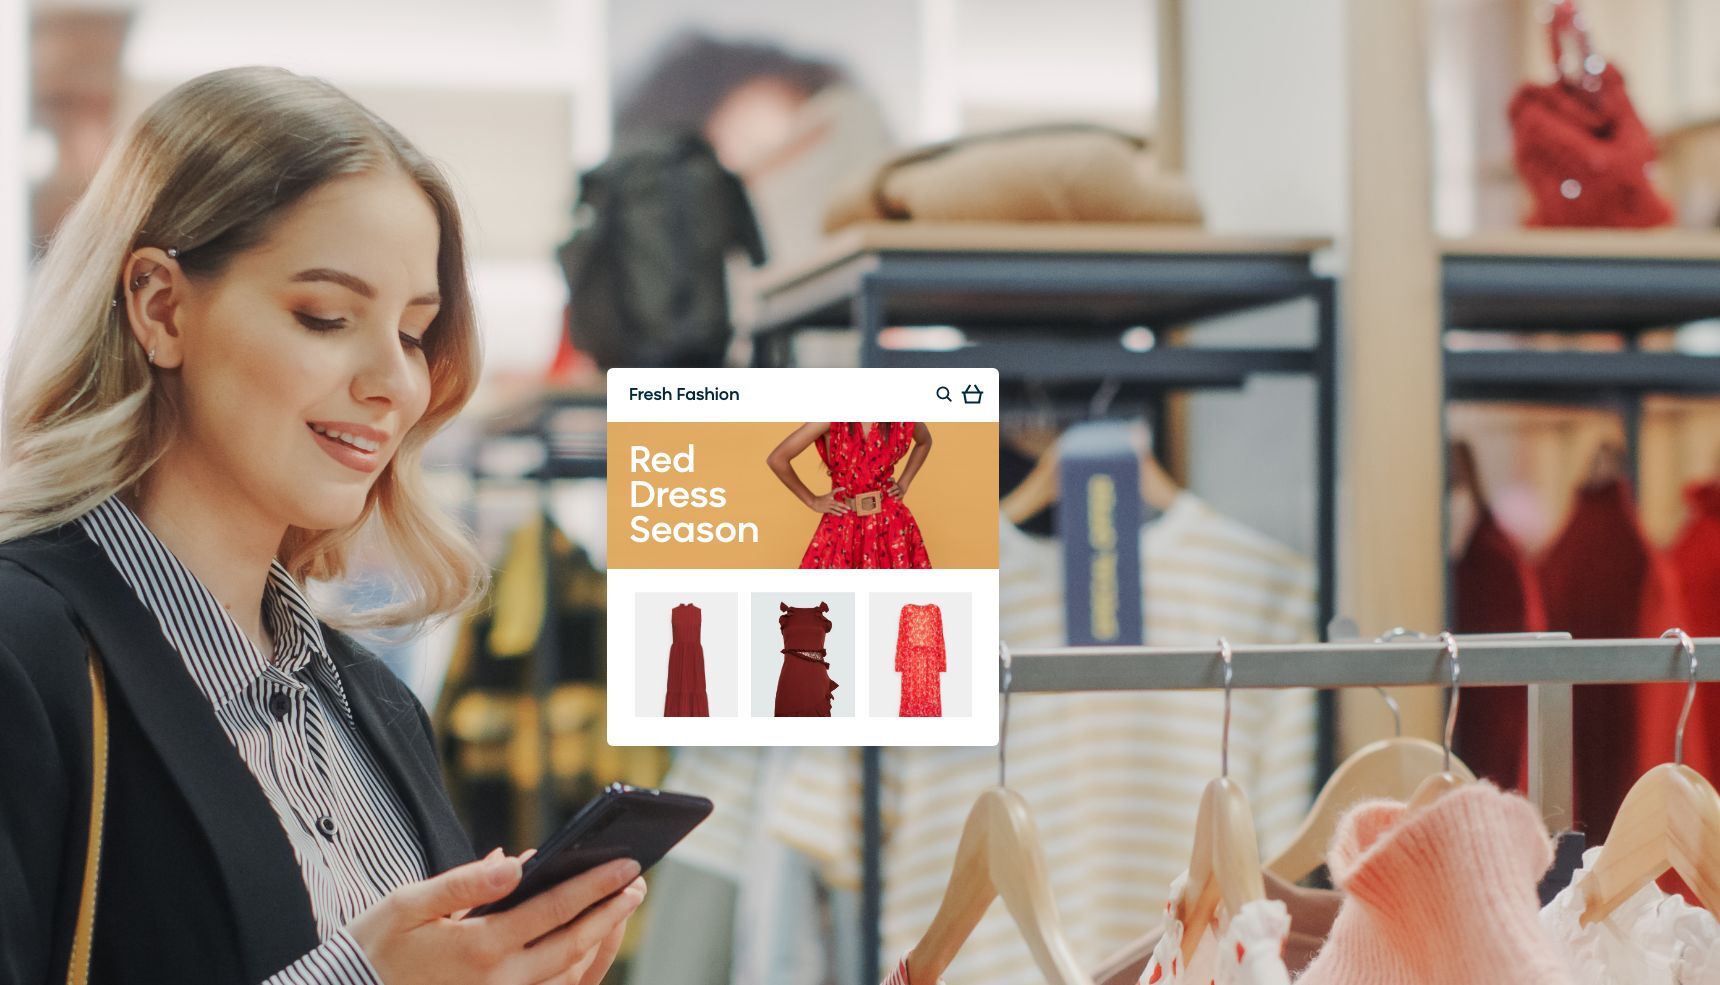 A company using AI in retail to connect the in-store and online shopping experience.